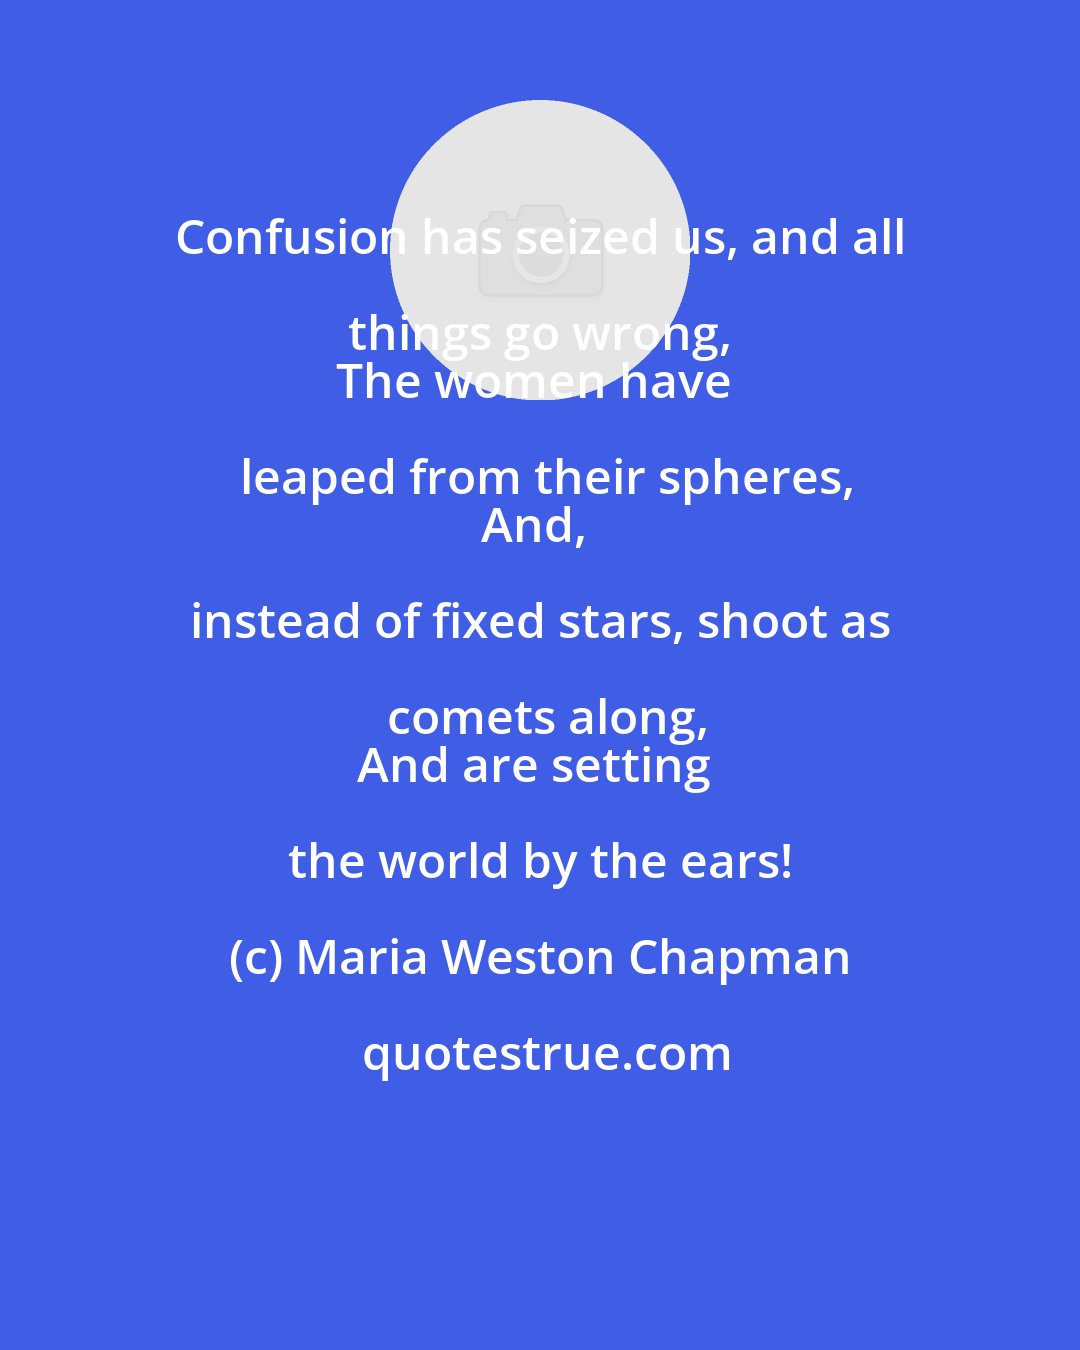 Maria Weston Chapman: Confusion has seized us, and all things go wrong, 
The women have leaped from their spheres,
And, instead of fixed stars, shoot as comets along,
And are setting the world by the ears!